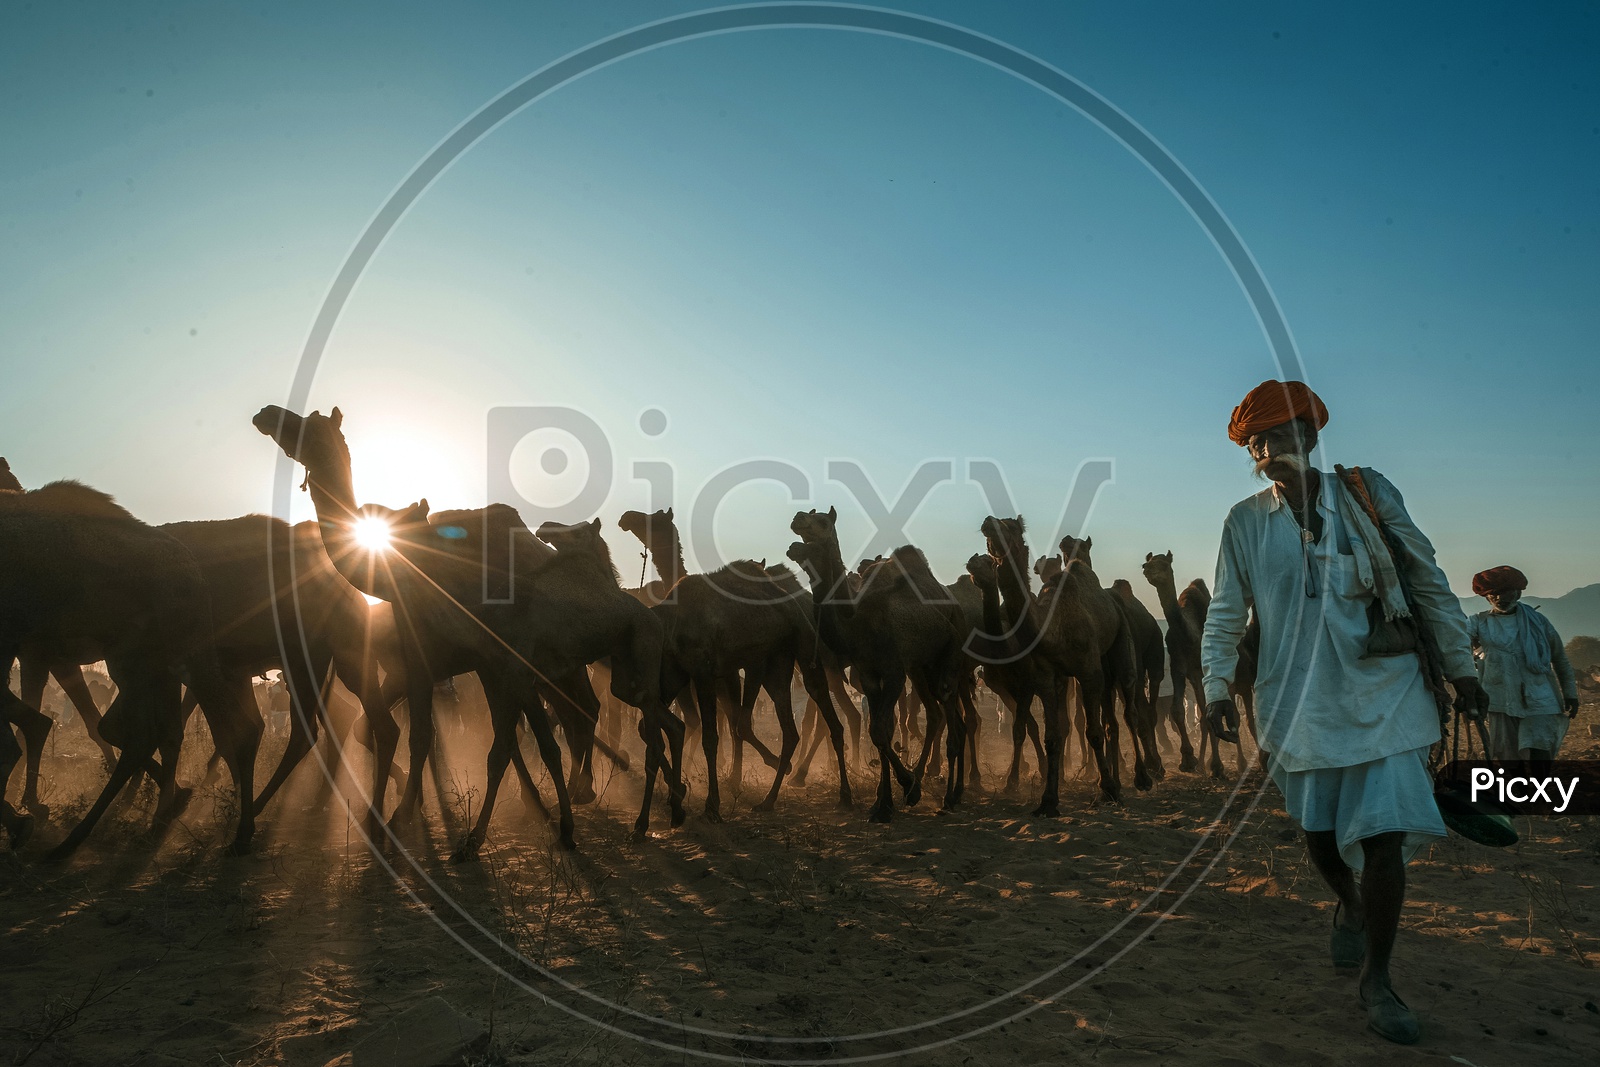 marching towards the oasis